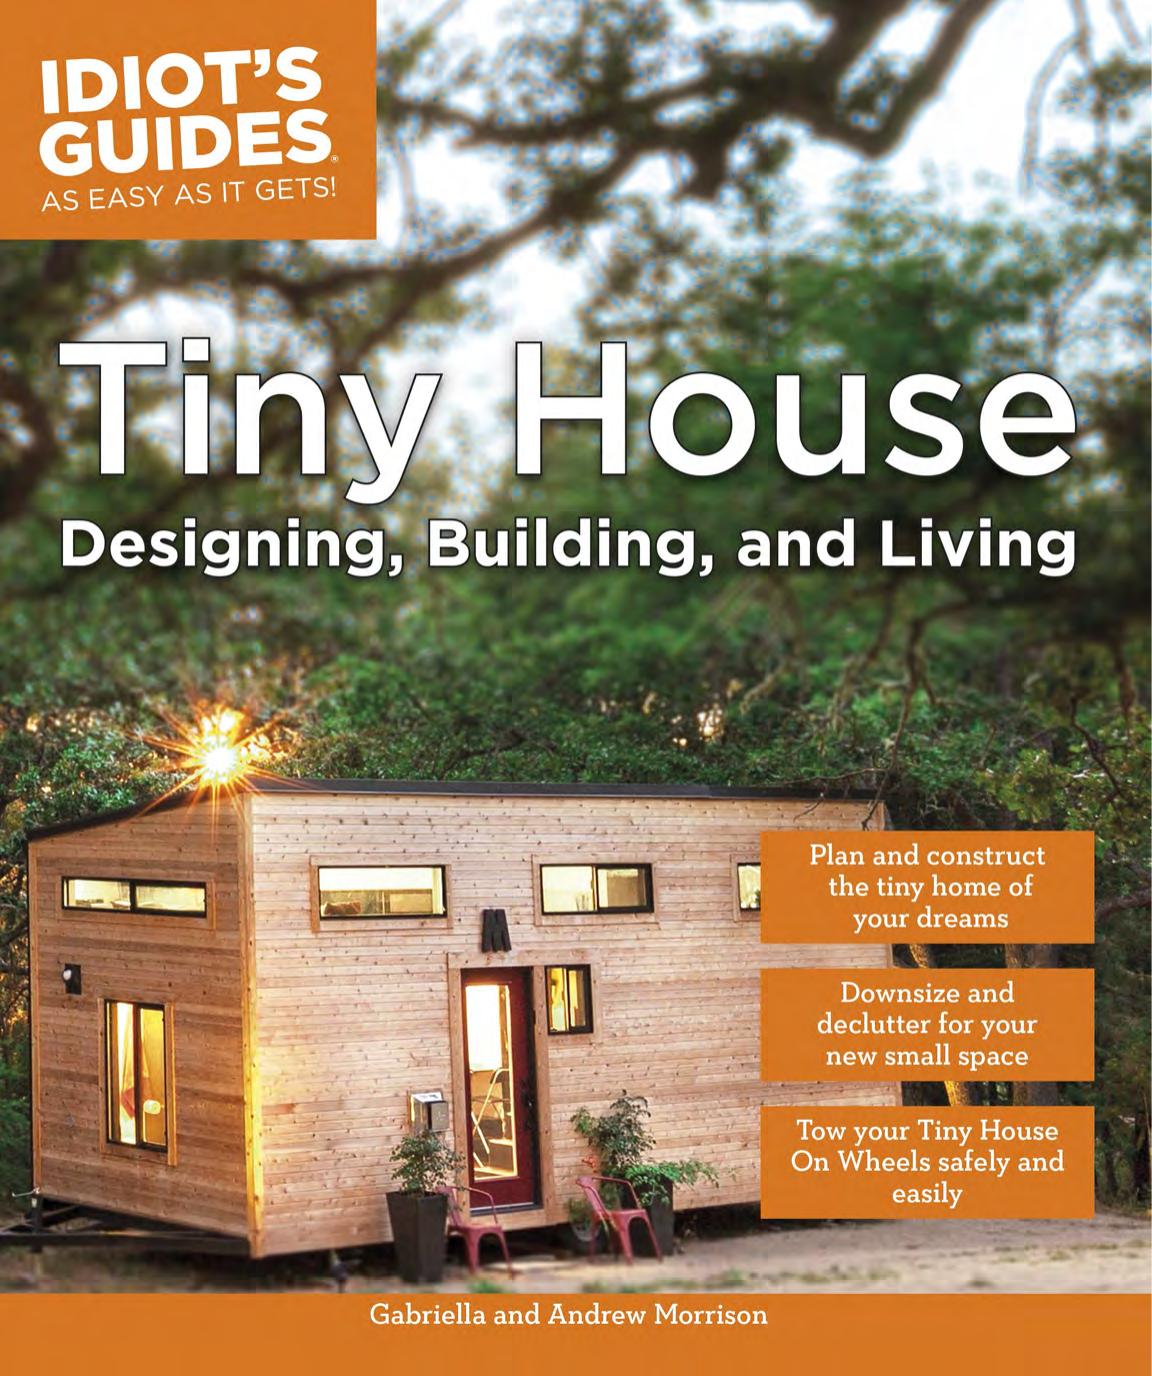 Idiot's Guides Tiny House Designing, Building, & Living